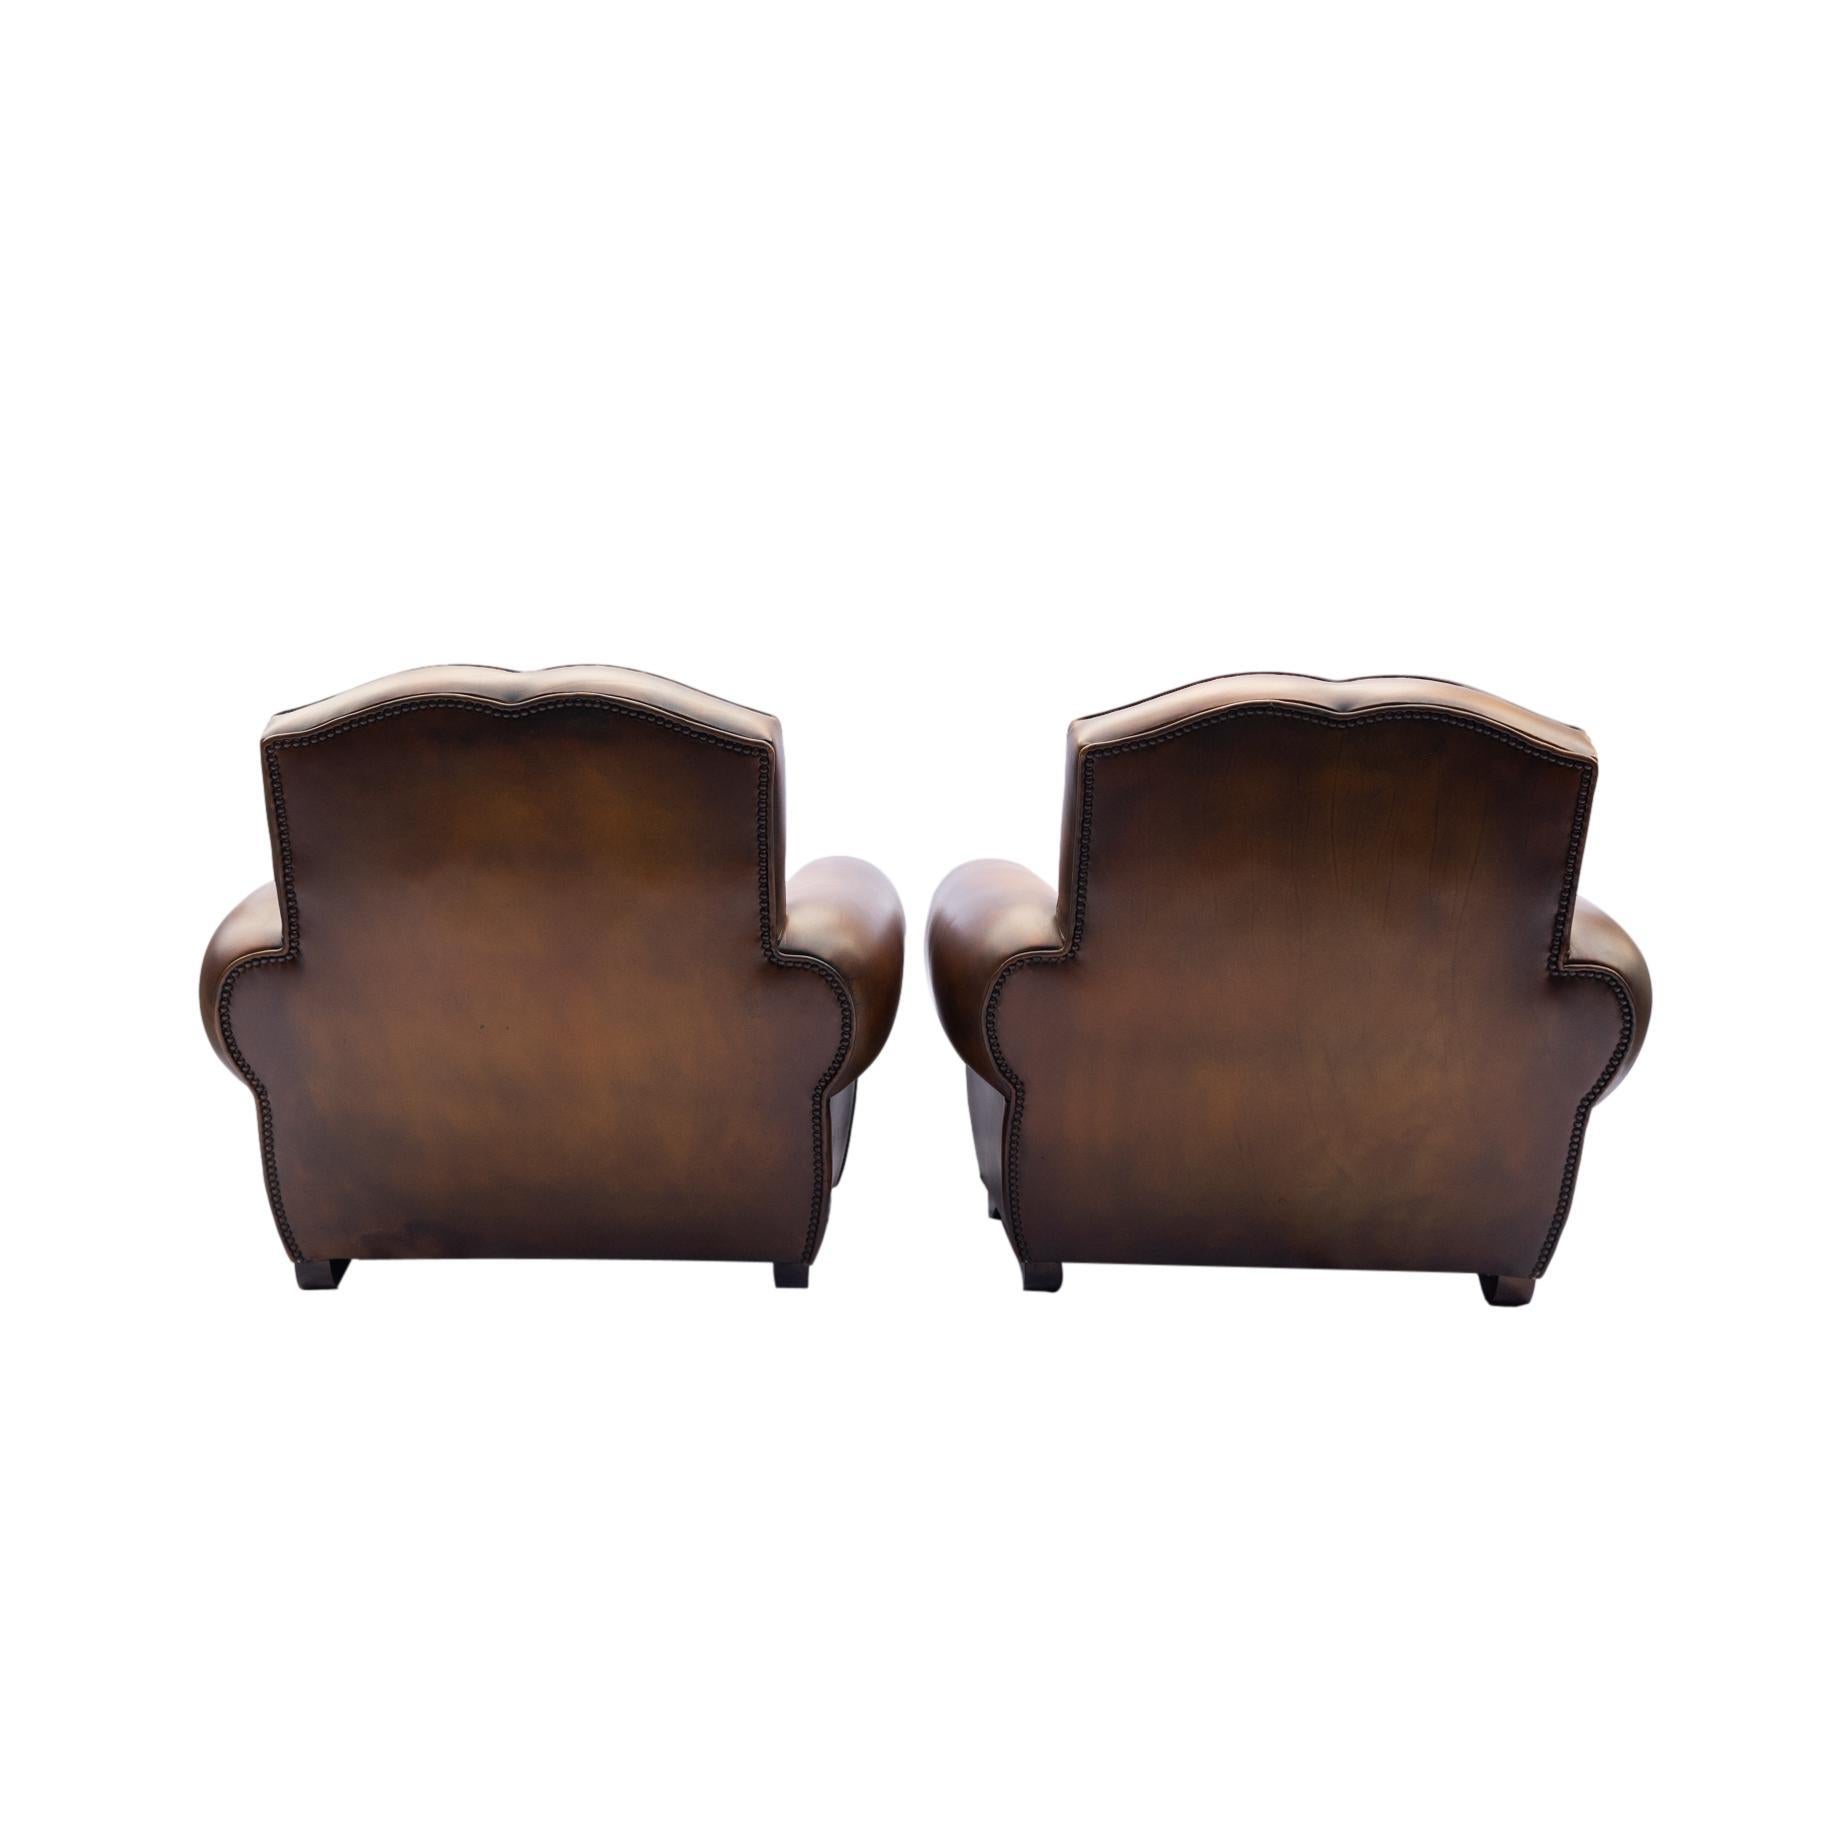 Oak Pair of Art Deco Leather Club Chairs with Mustache Backs, French, ca. 1935